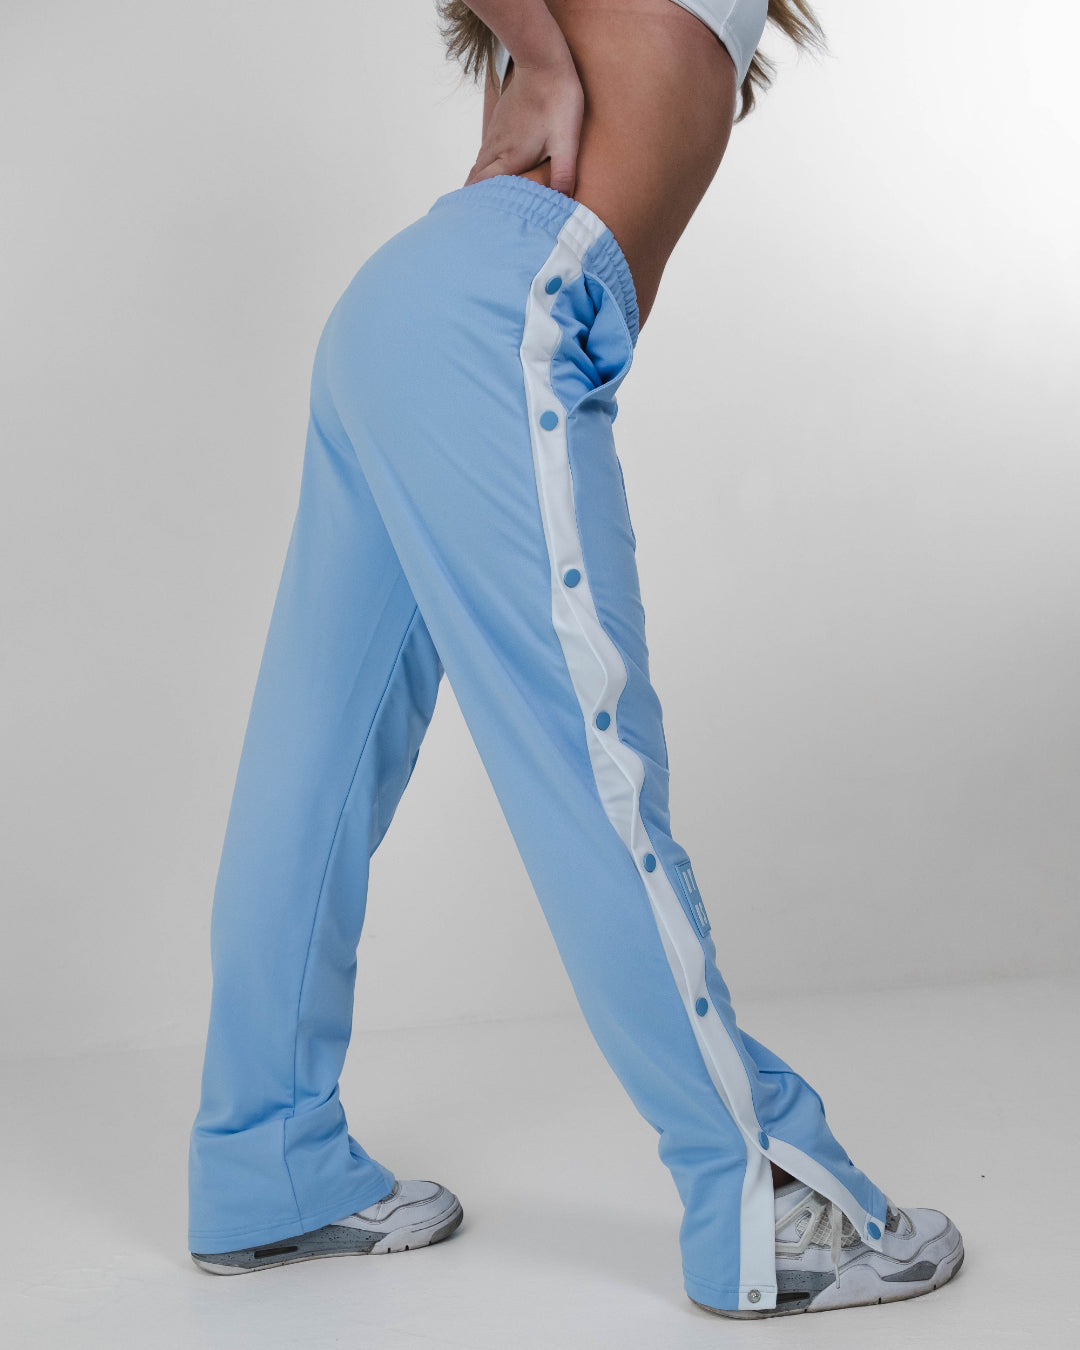 Dare - Trackpants - Baby Blue